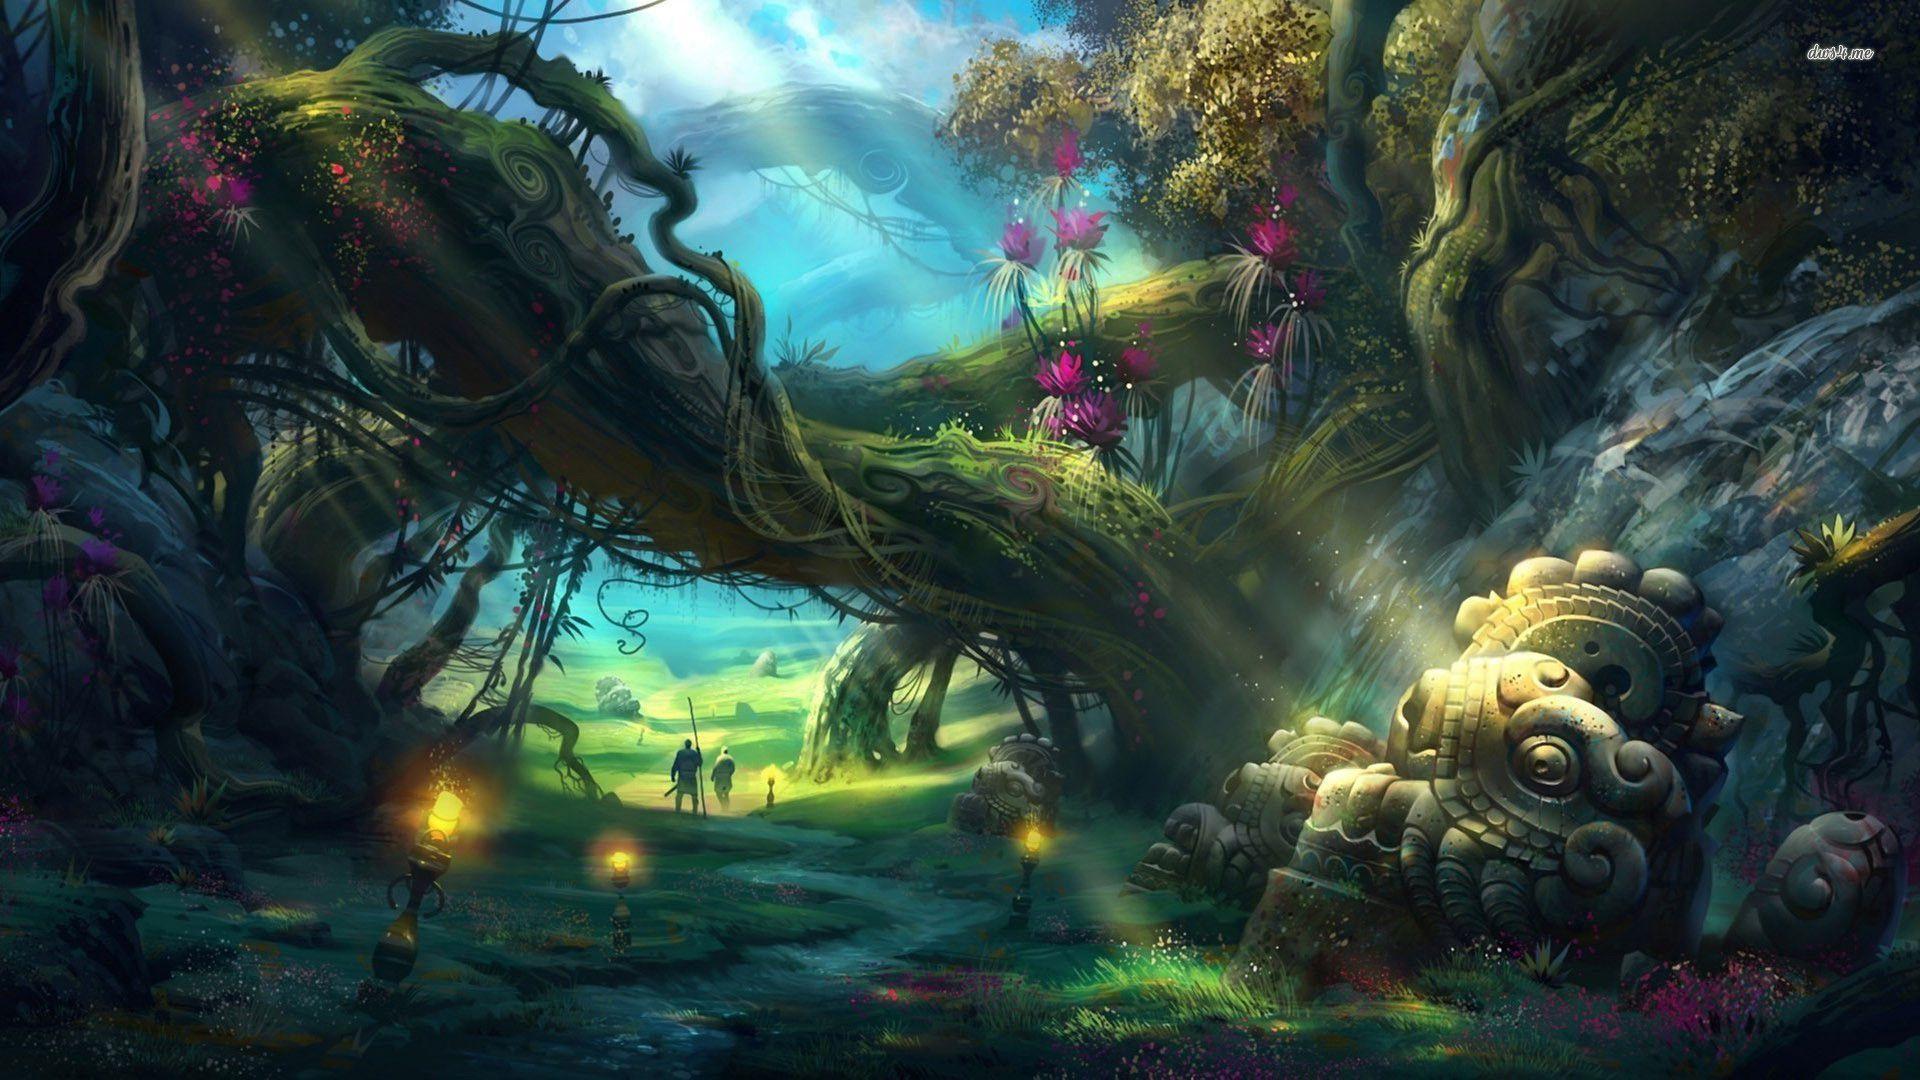 Download Adventures The Enchanted Forest Wallpaper 1920x1080